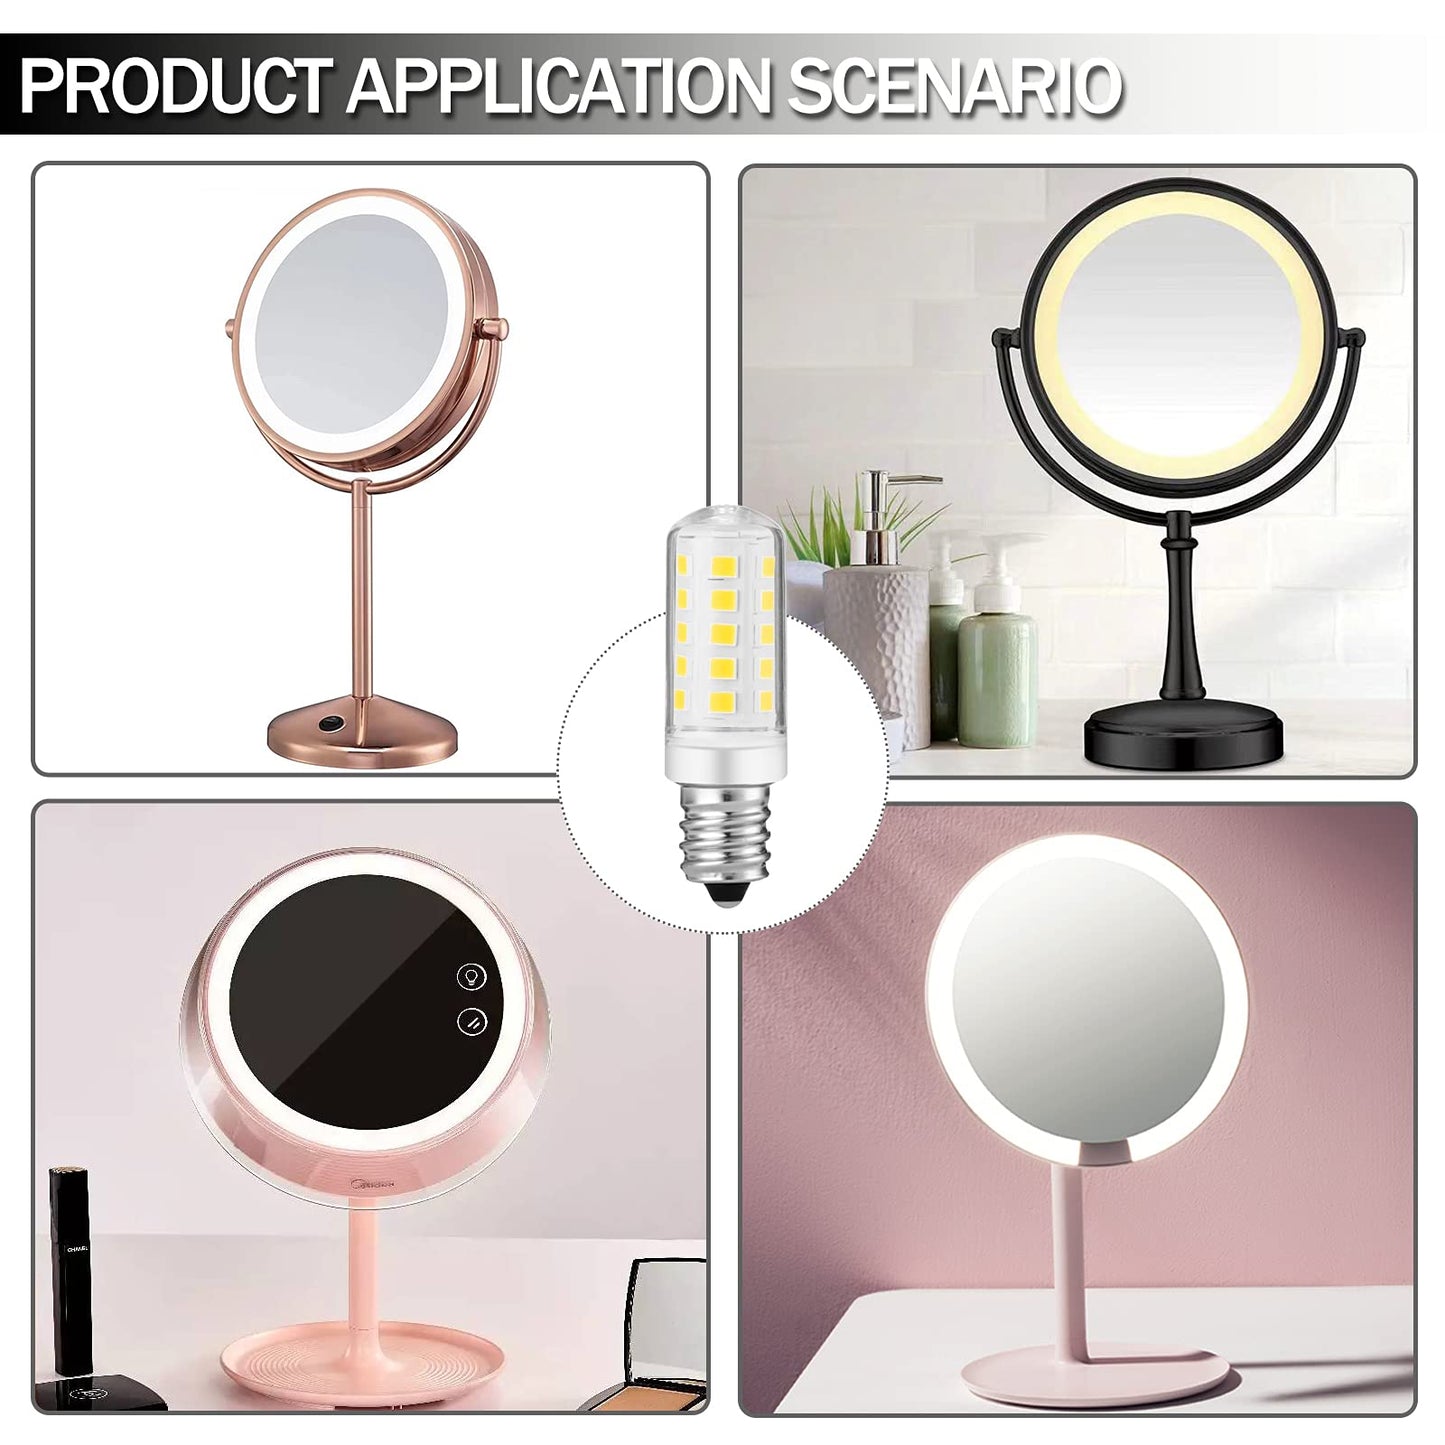 X-Molin Double-Side Illuminated Magnification Mirror Lighted Mirror Replacement Bulb/for Cosmetic Vanity Makeup Mirror or Double Sided Lighted Magnification,Warm White 3K